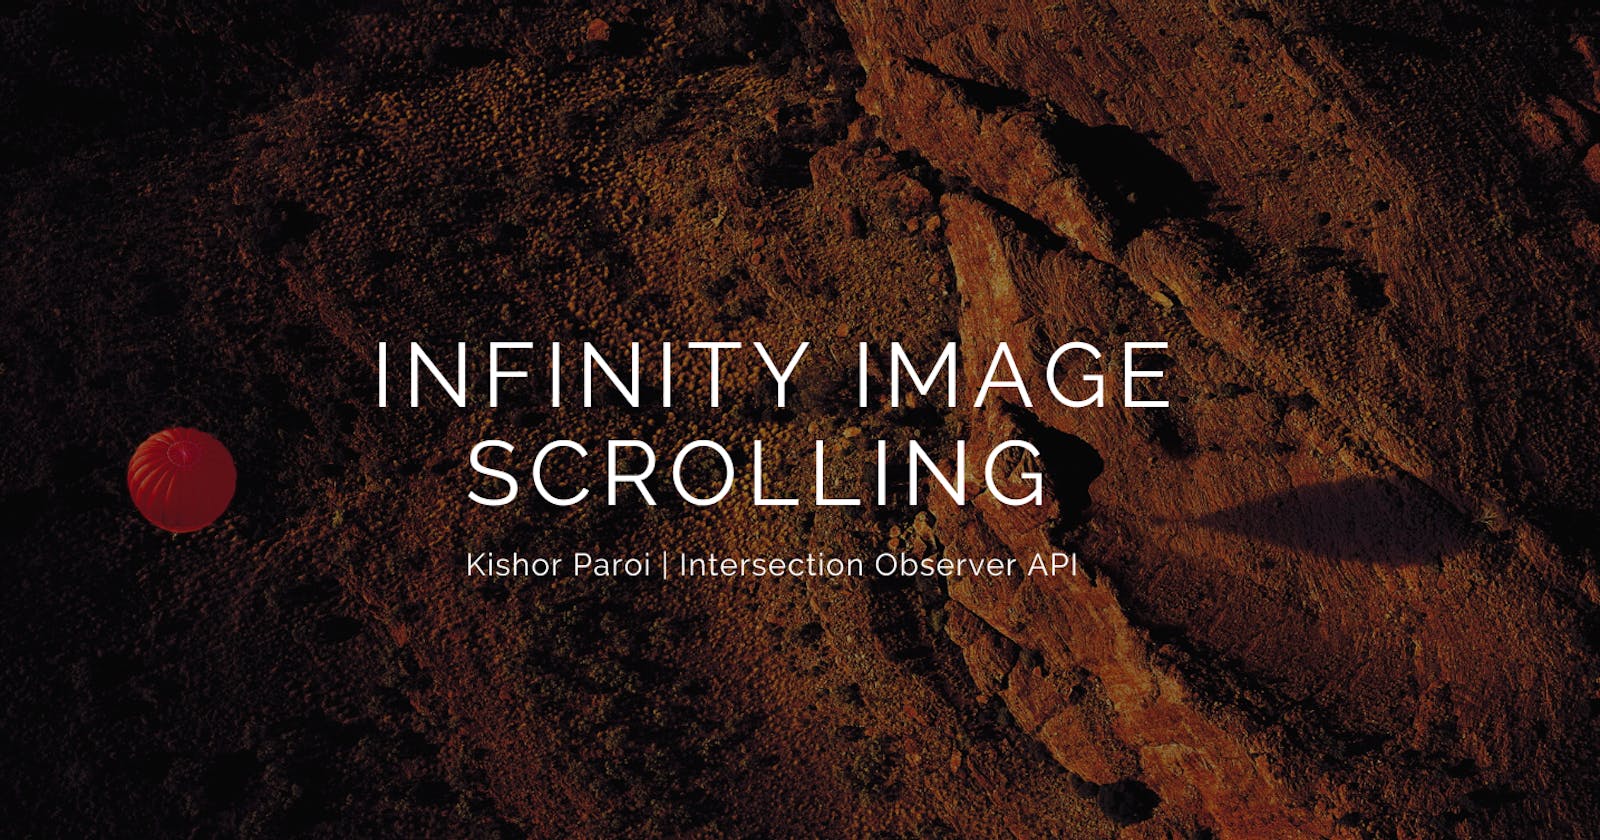 Infinity Image Scrolling Using Intersection Observer API